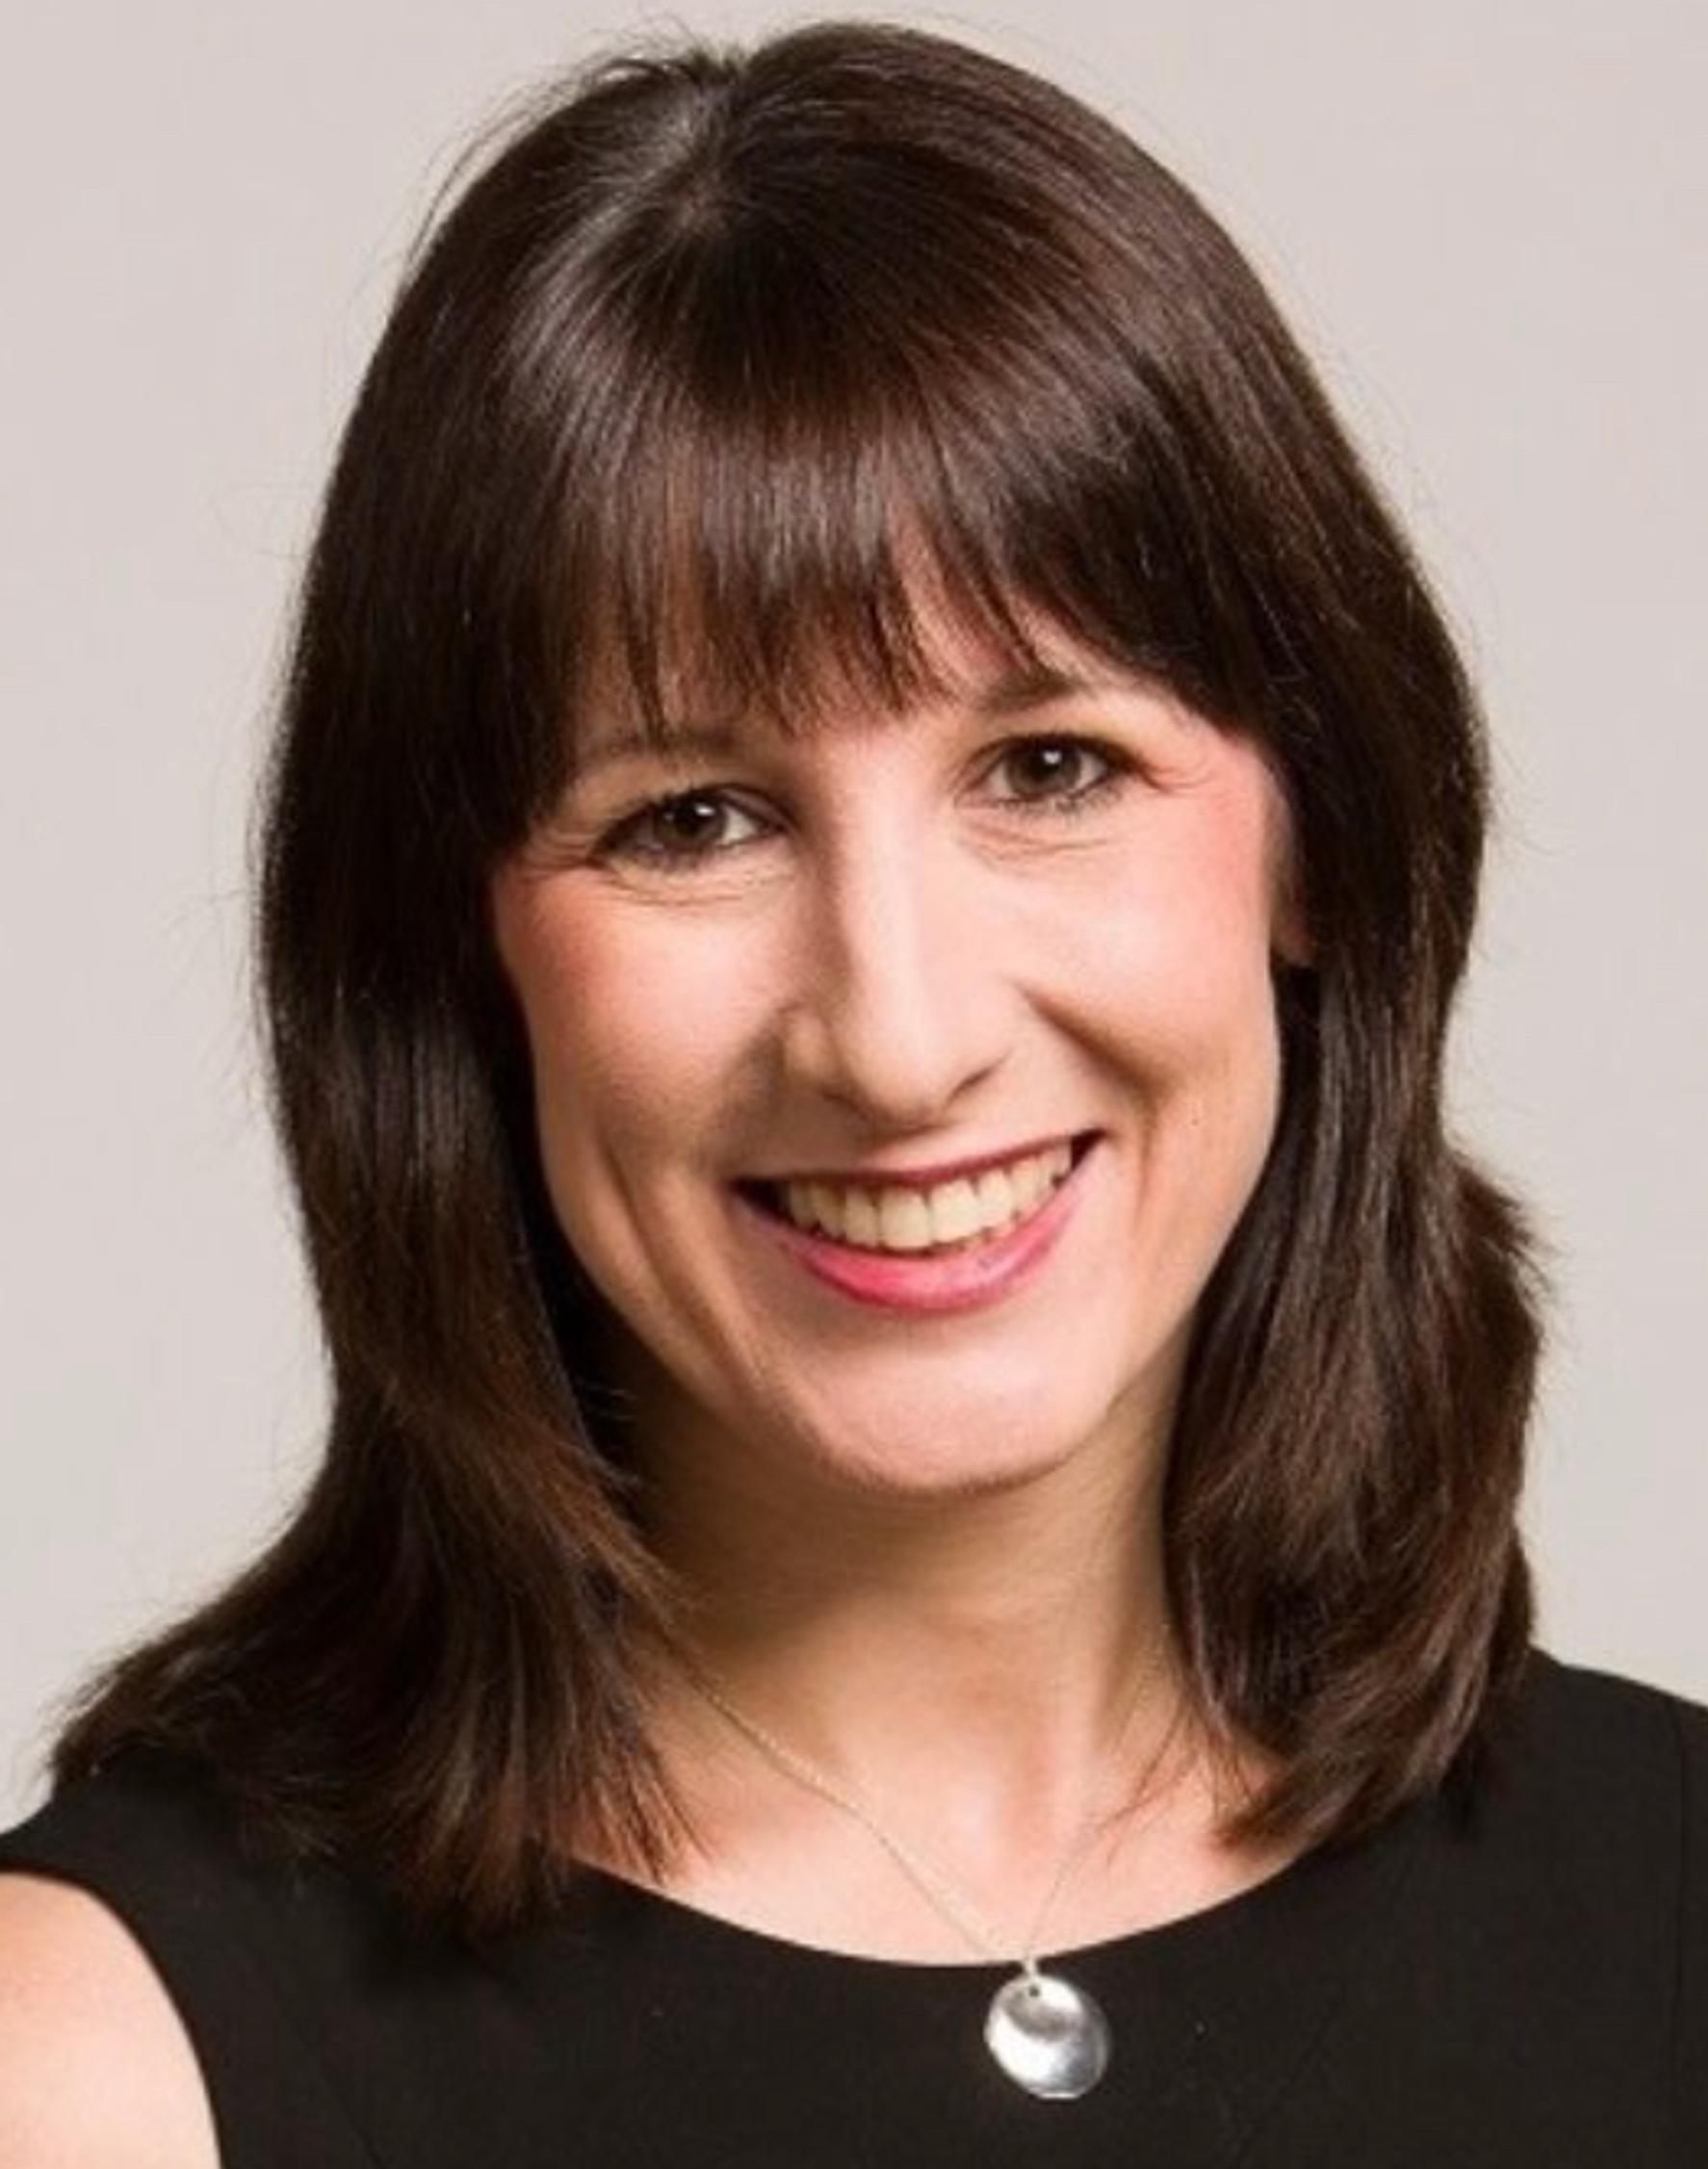 Rachel Reeves: If I were in the Treasury, I would have been on the phone to the chief executive of HS2 non-stop; demanding answers – and solutions – on behalf of taxpayers, businesses and commuters